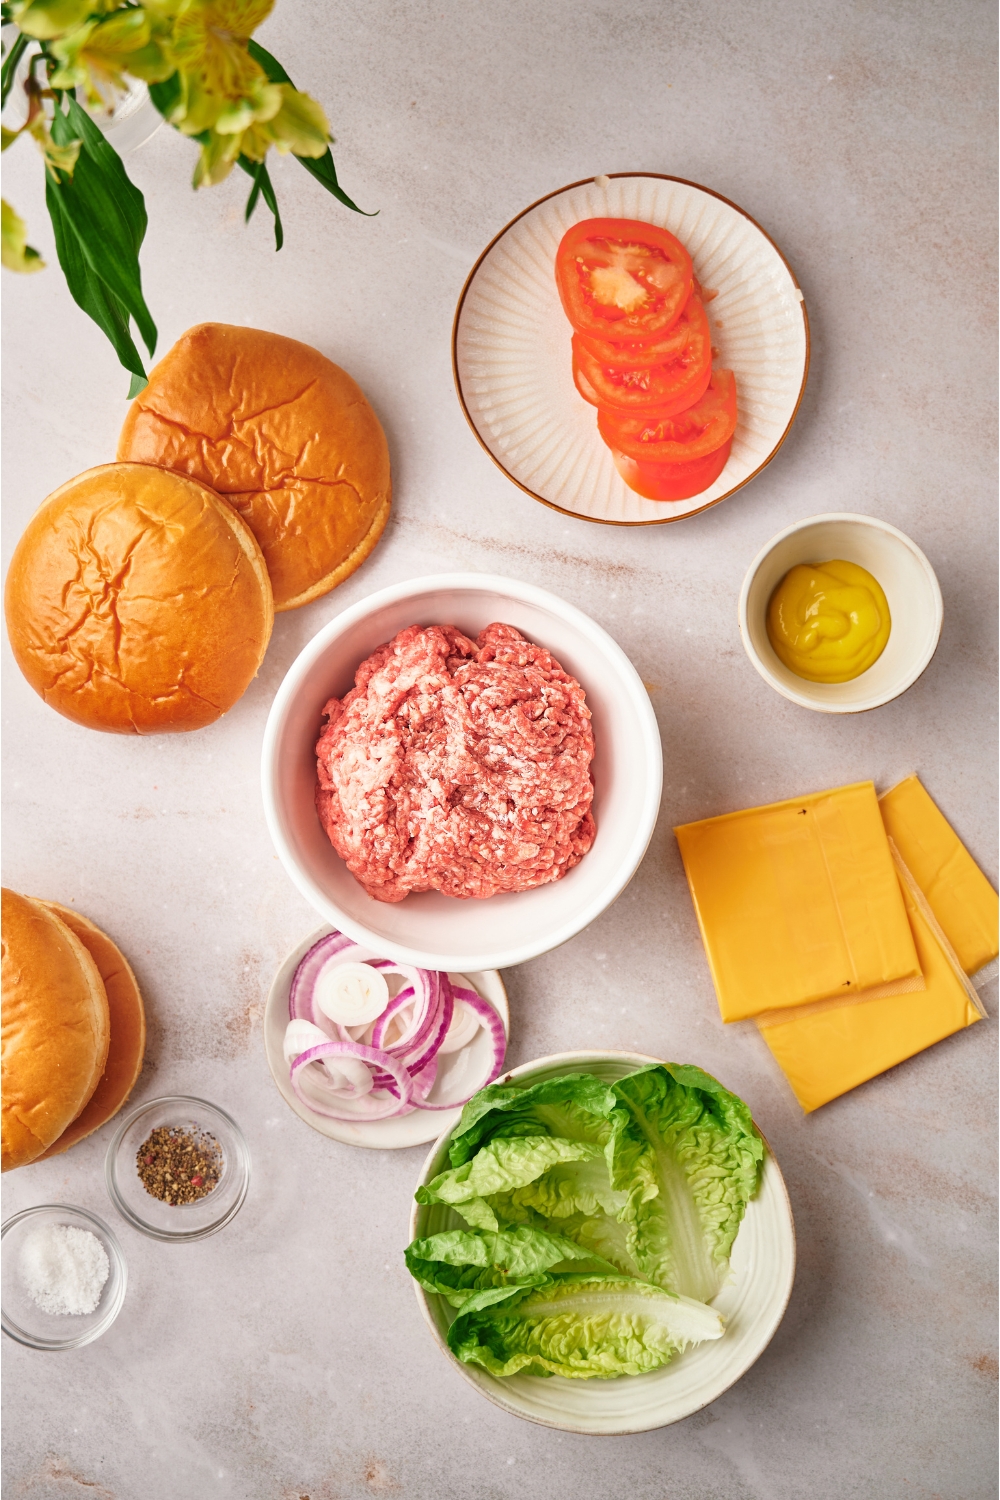 An assortment of ingredients including a bowl of raw ground beef, two buns, three slices of cheese, and plates of lettuce, red onion, sliced tomatoes, and mustard.